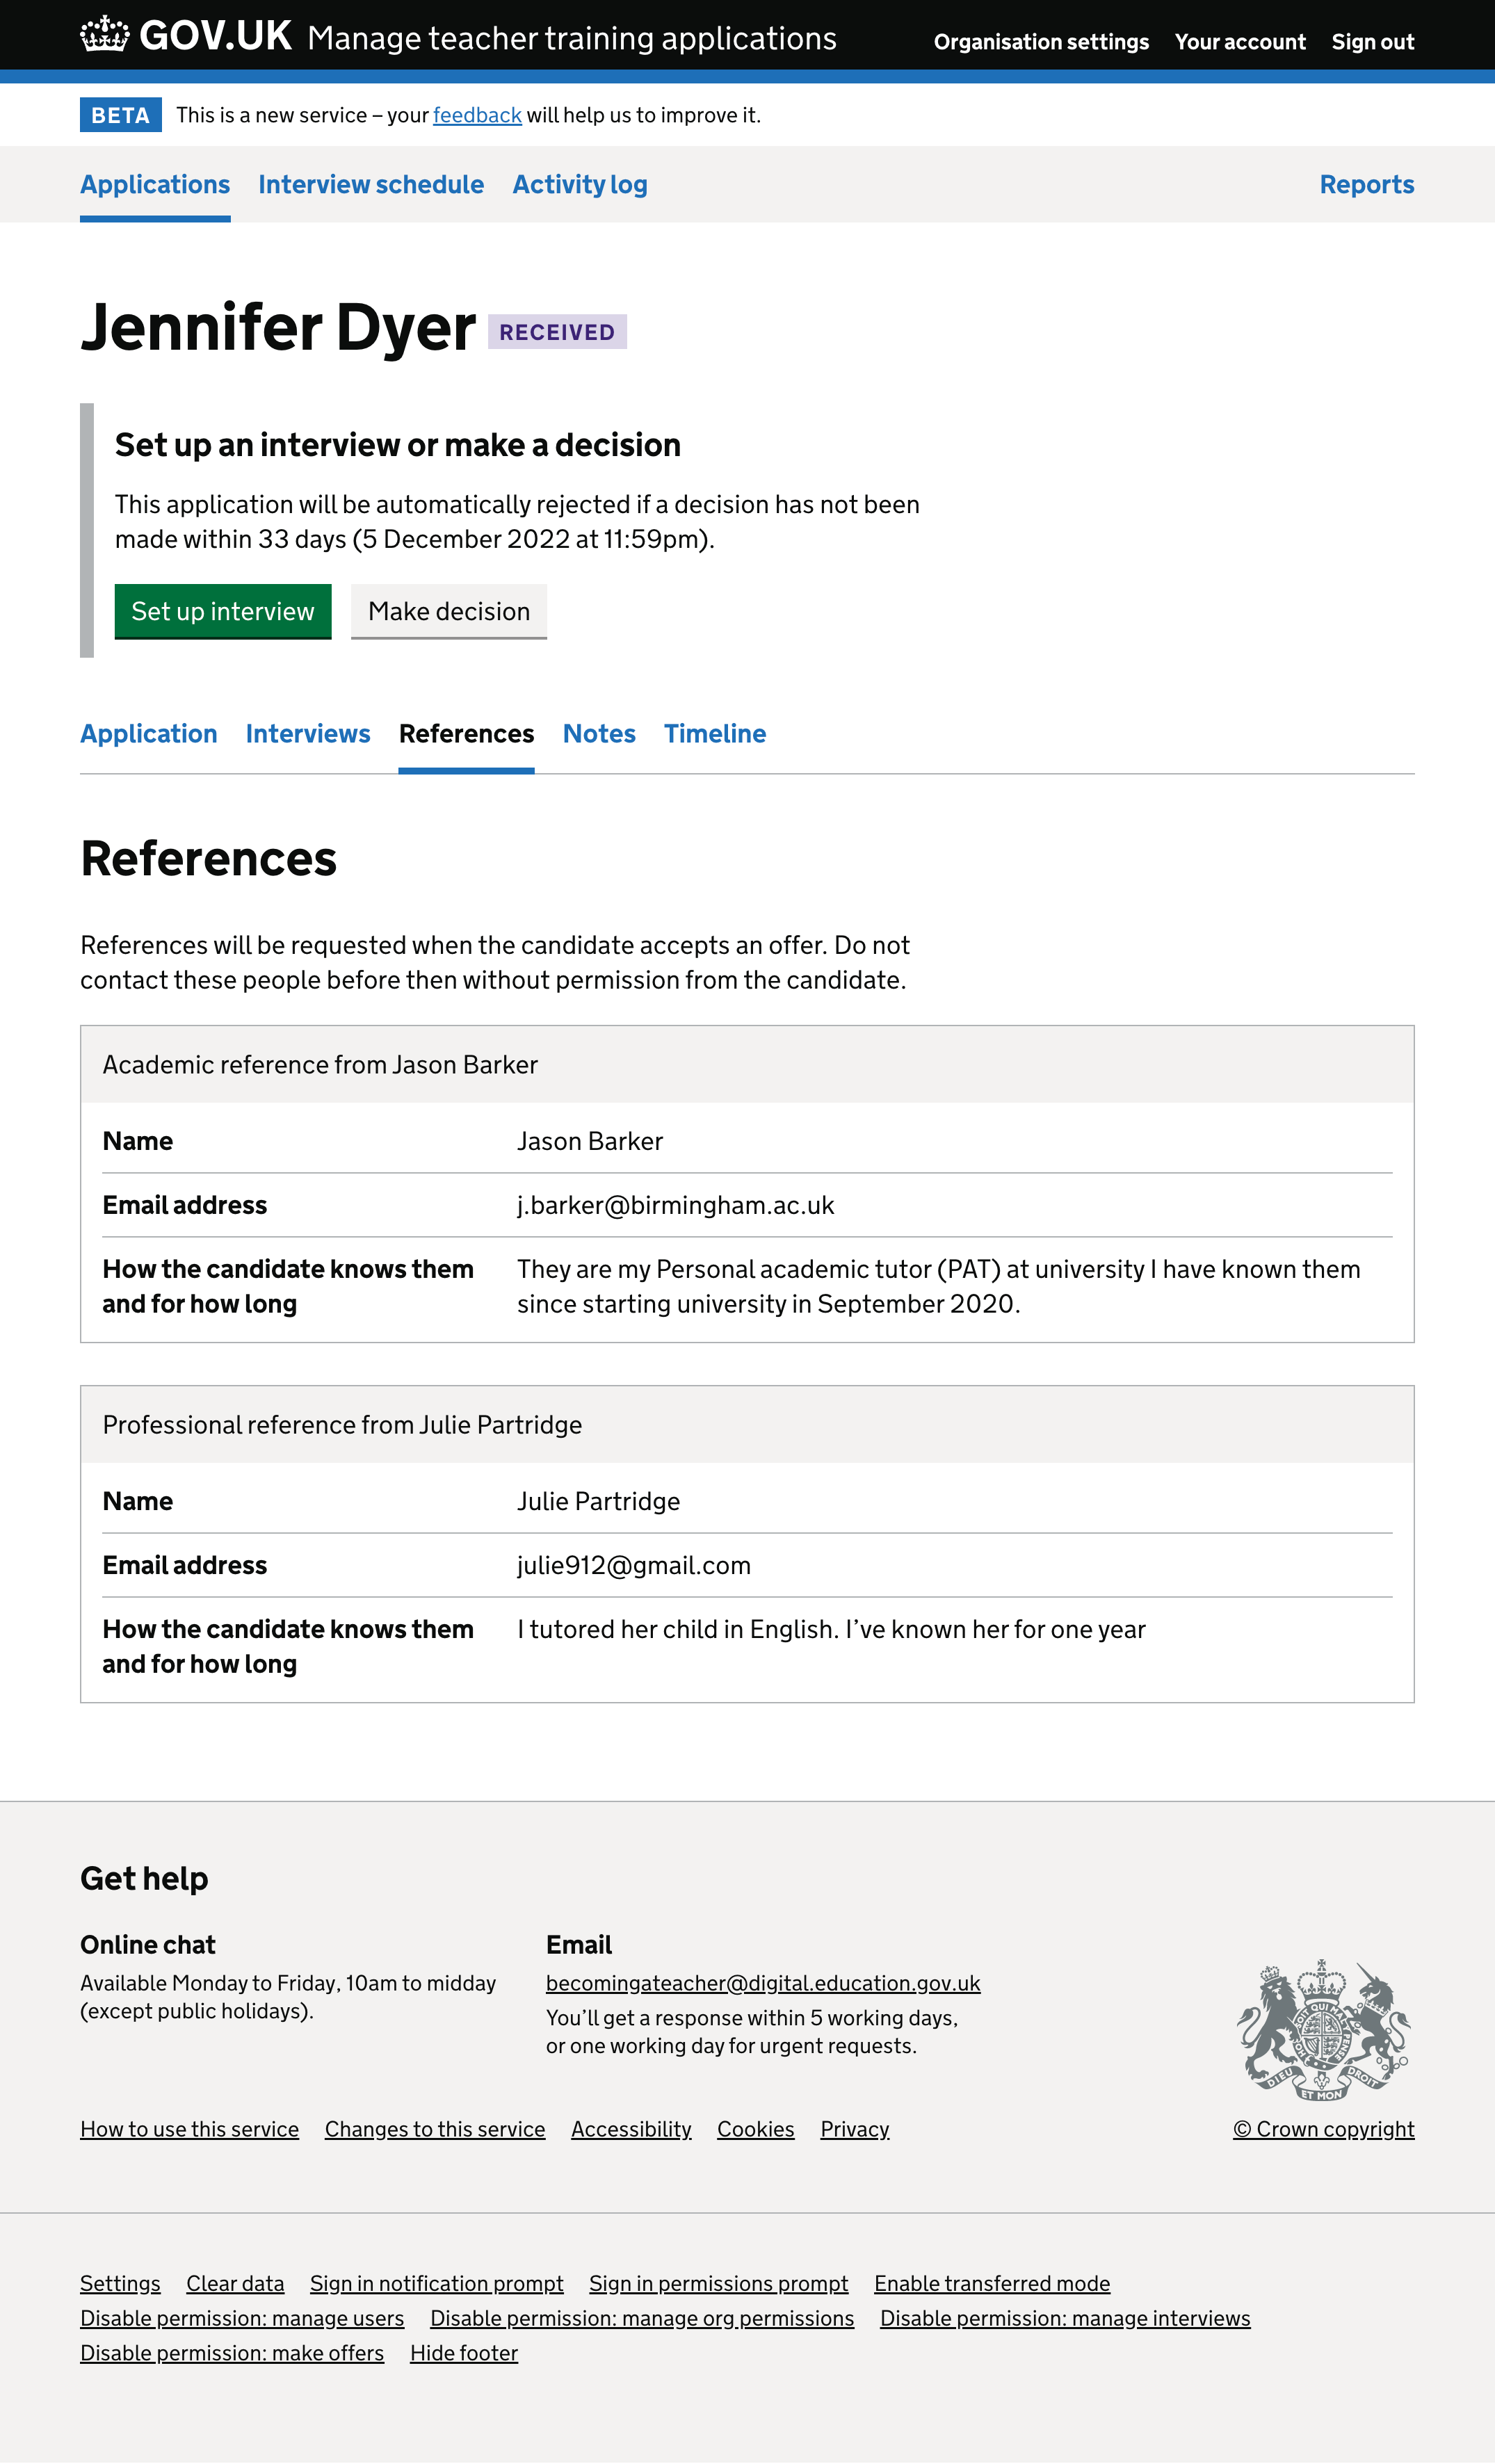 Screenshot showing a page with the heading 'References' and the text 'References will be requested when the candidate accepts an offer. Do not contact these people before then without permission from the candidate.' followed by 2 references containing the details of their name, e-mail address and 'how the candidate knows them and for how long'